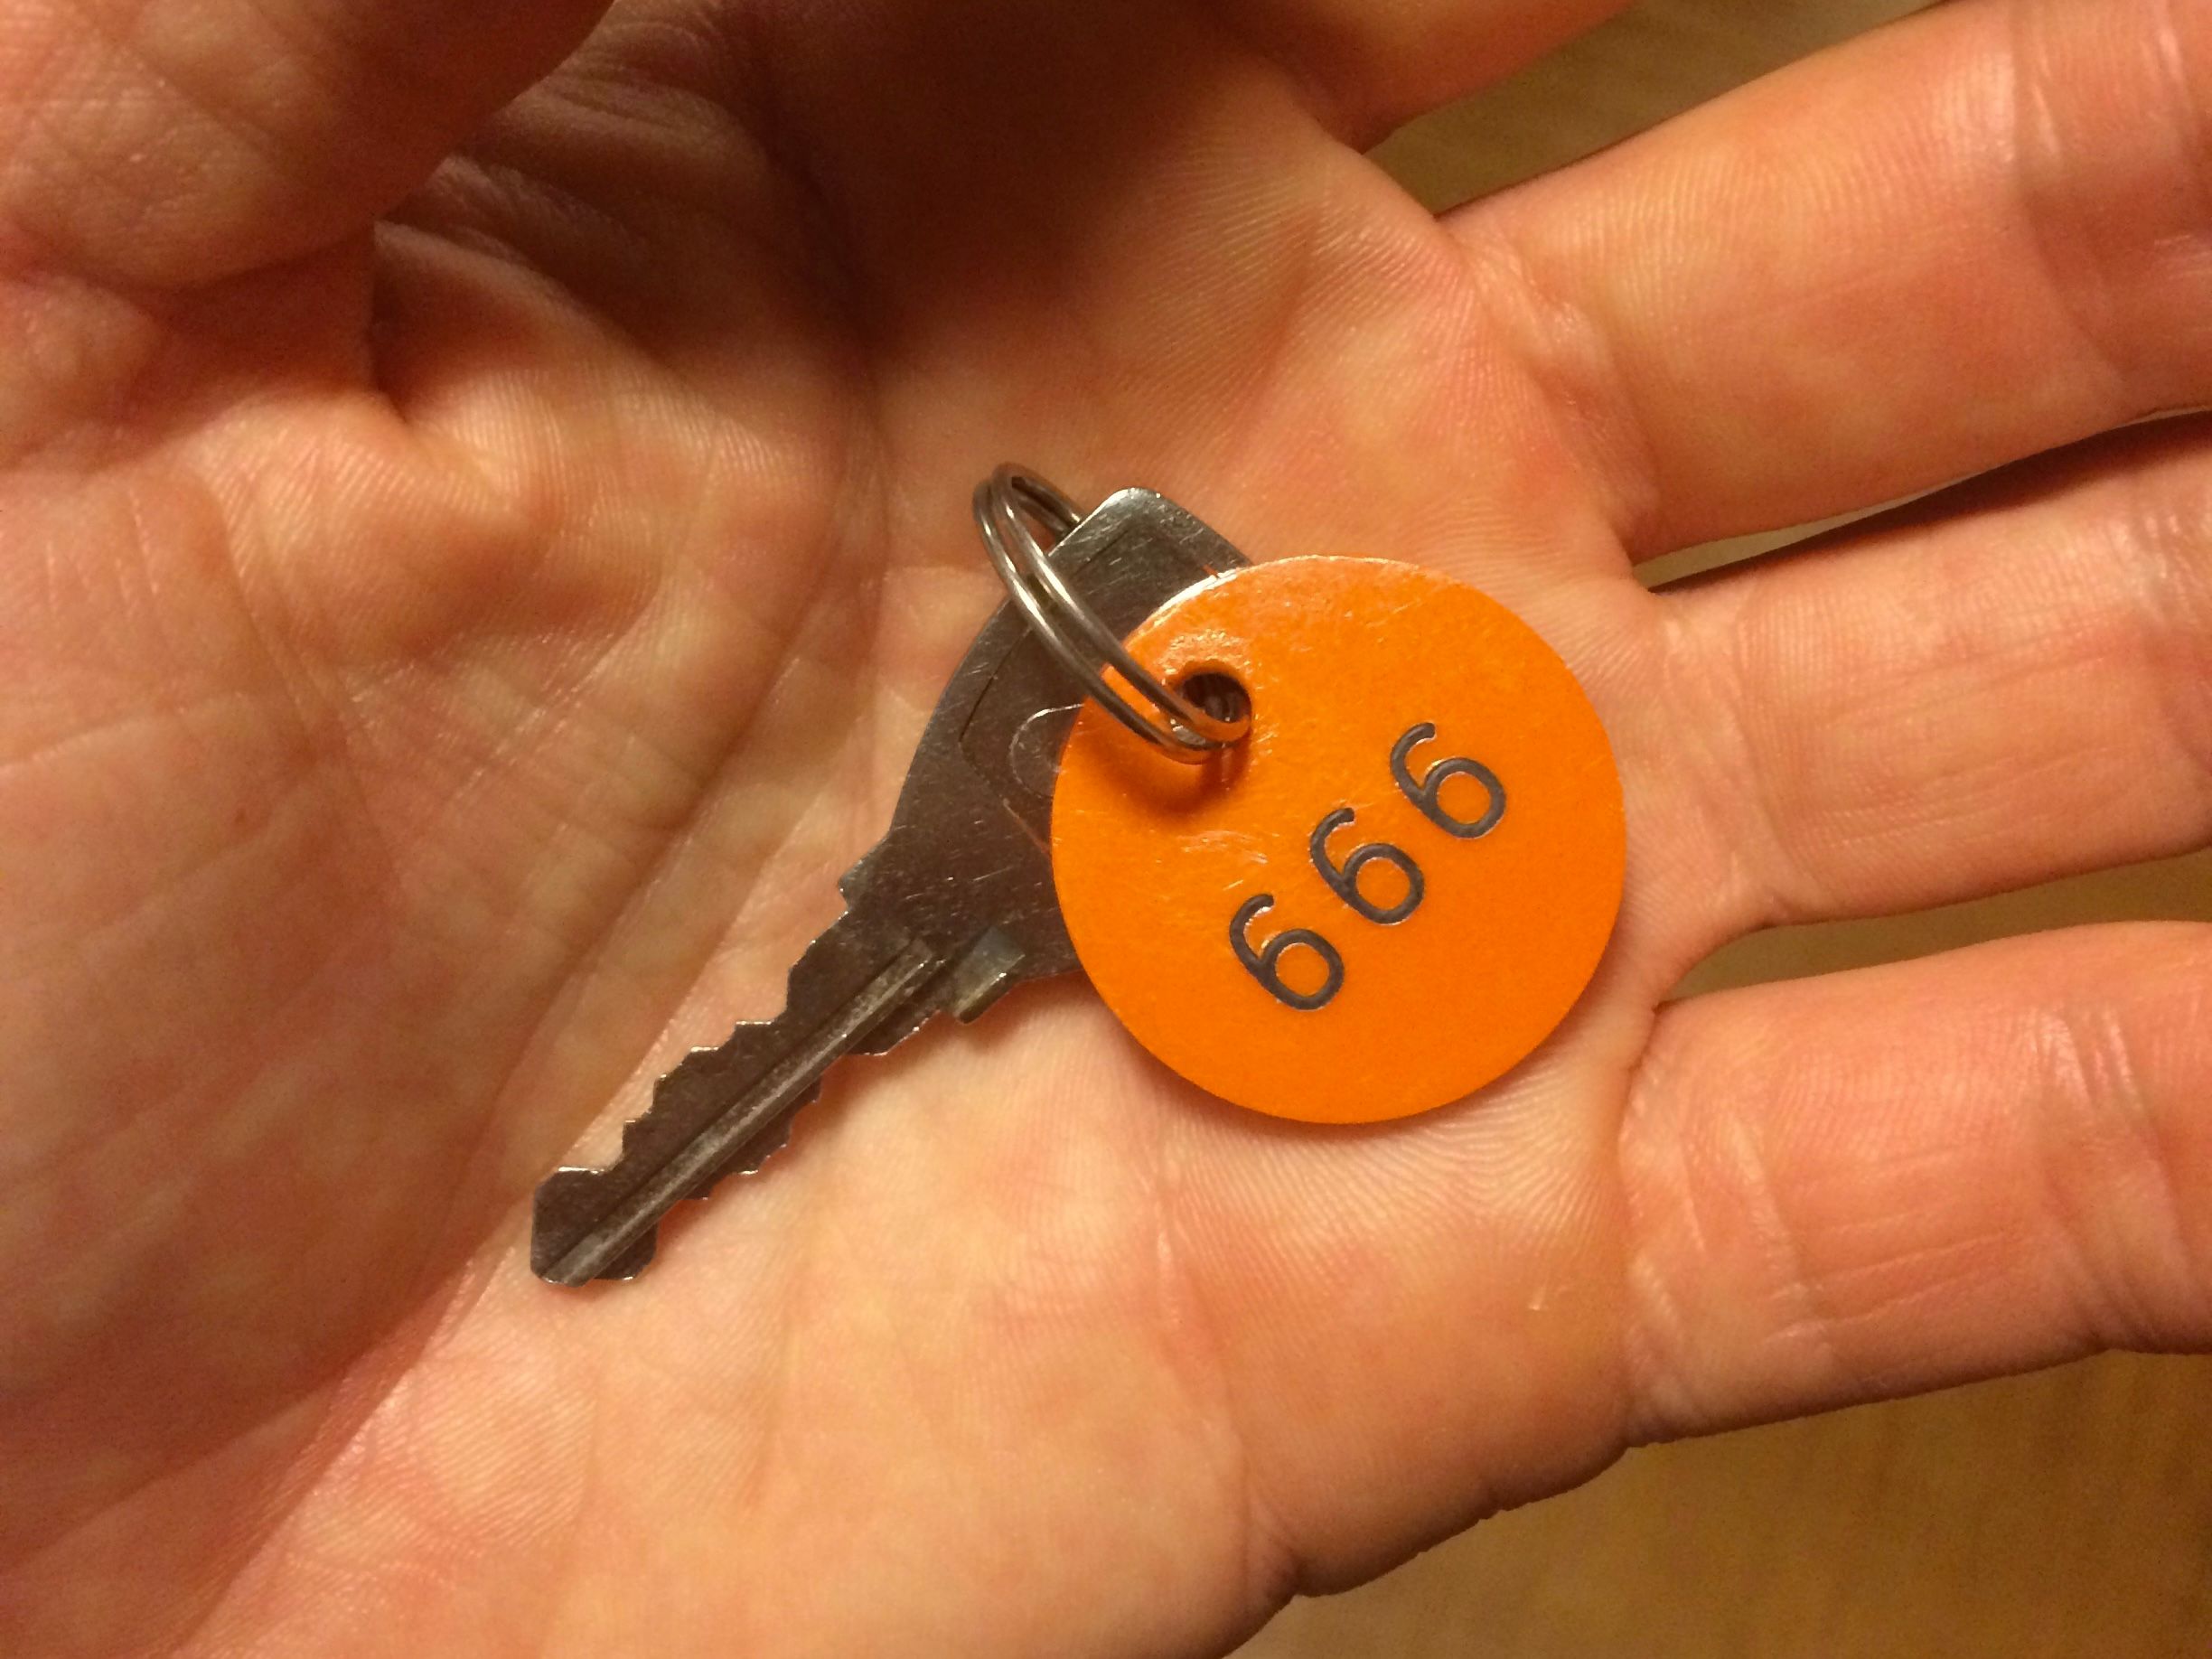 A key with an orange tag numbered 666.